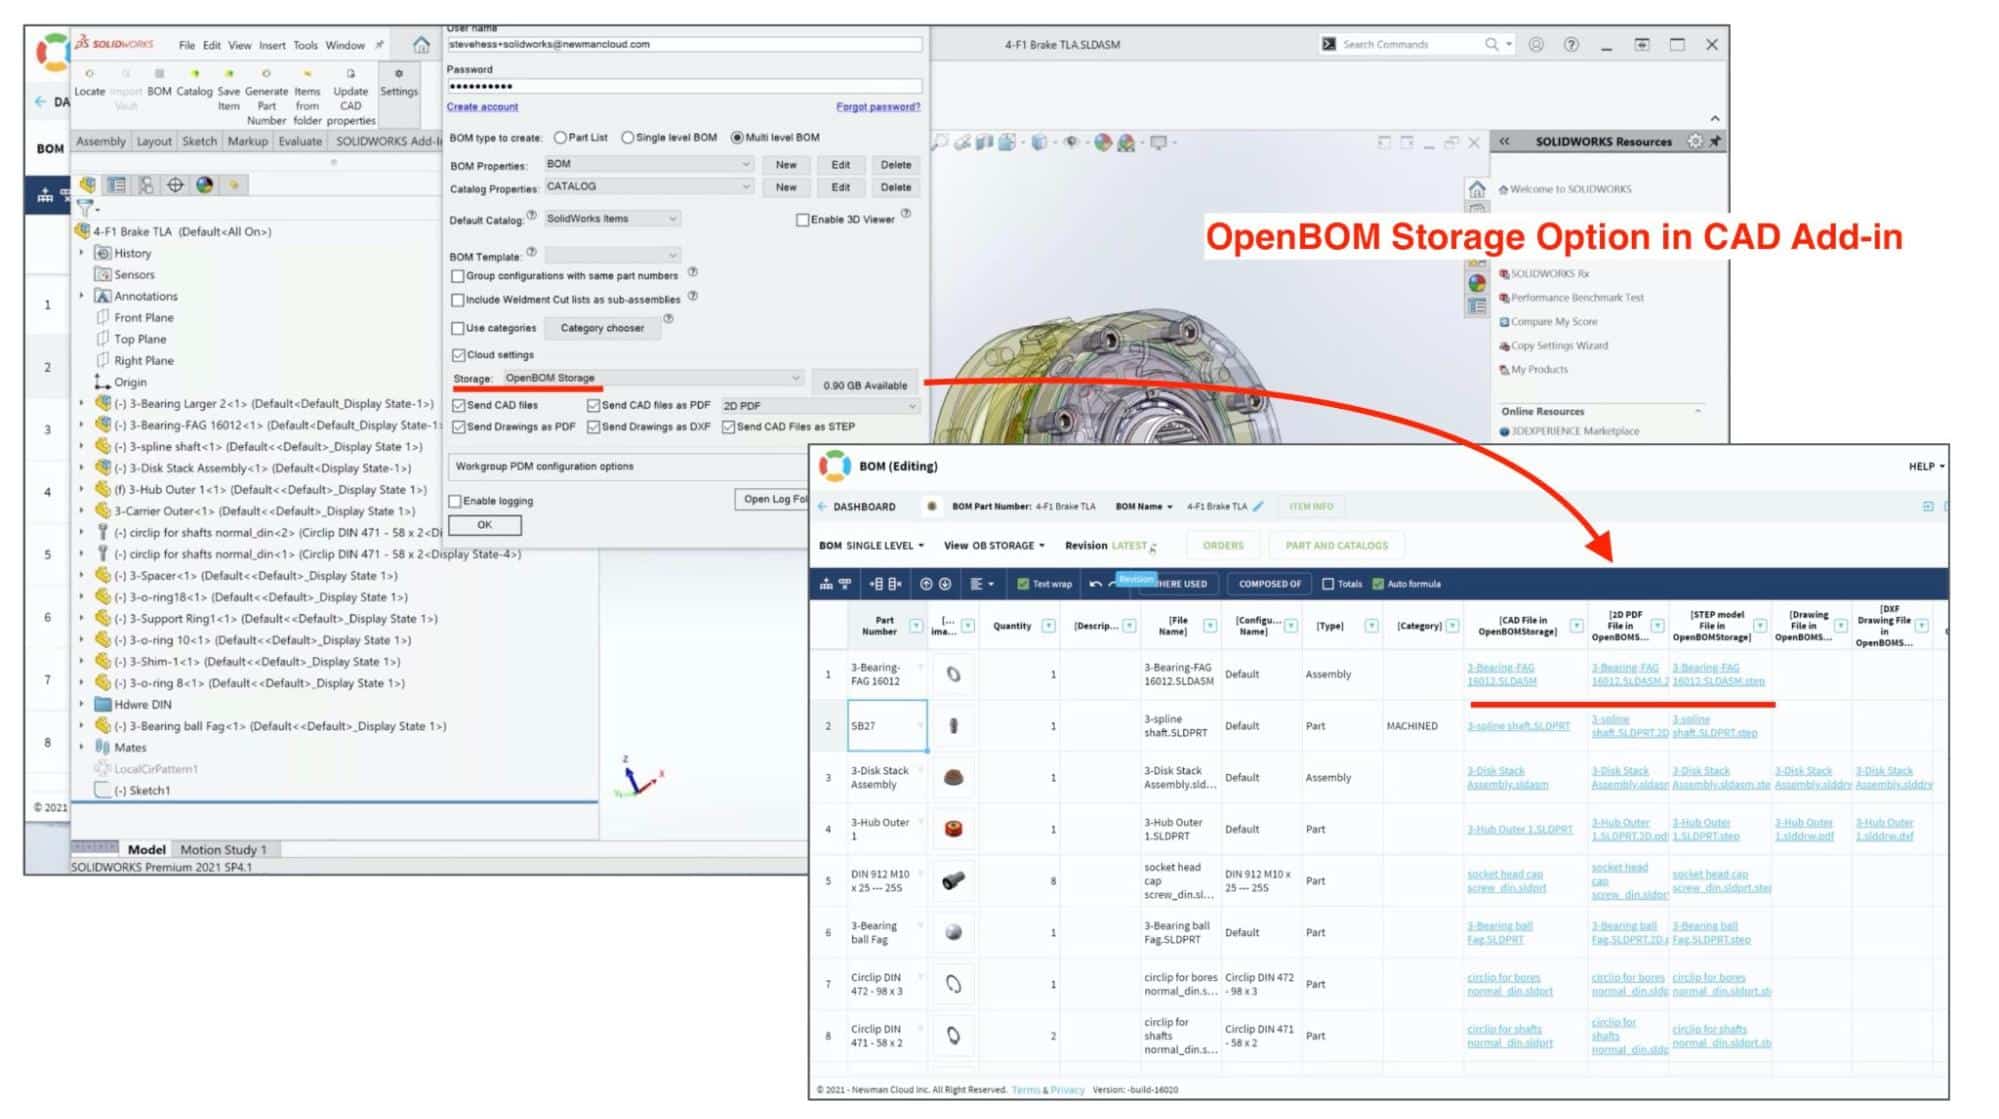 VIDEO PREVIEW: New OpenBOM Storage Option in CAD Add-ins